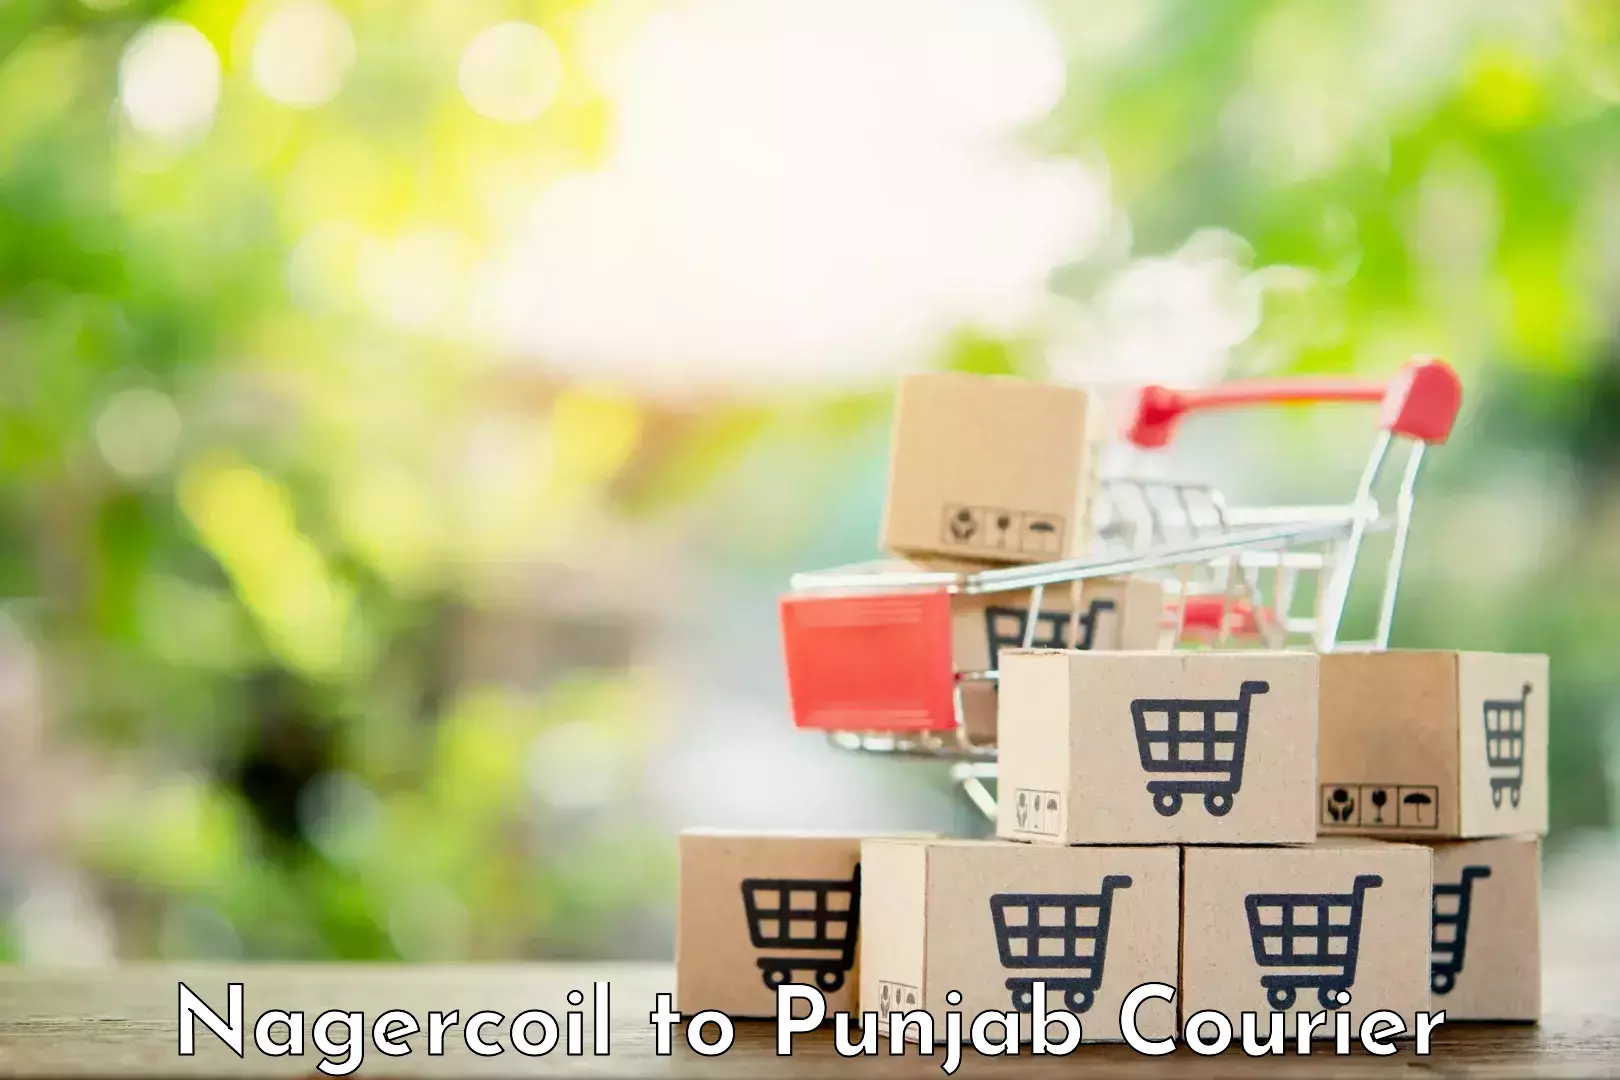 Comprehensive parcel tracking Nagercoil to Bathinda